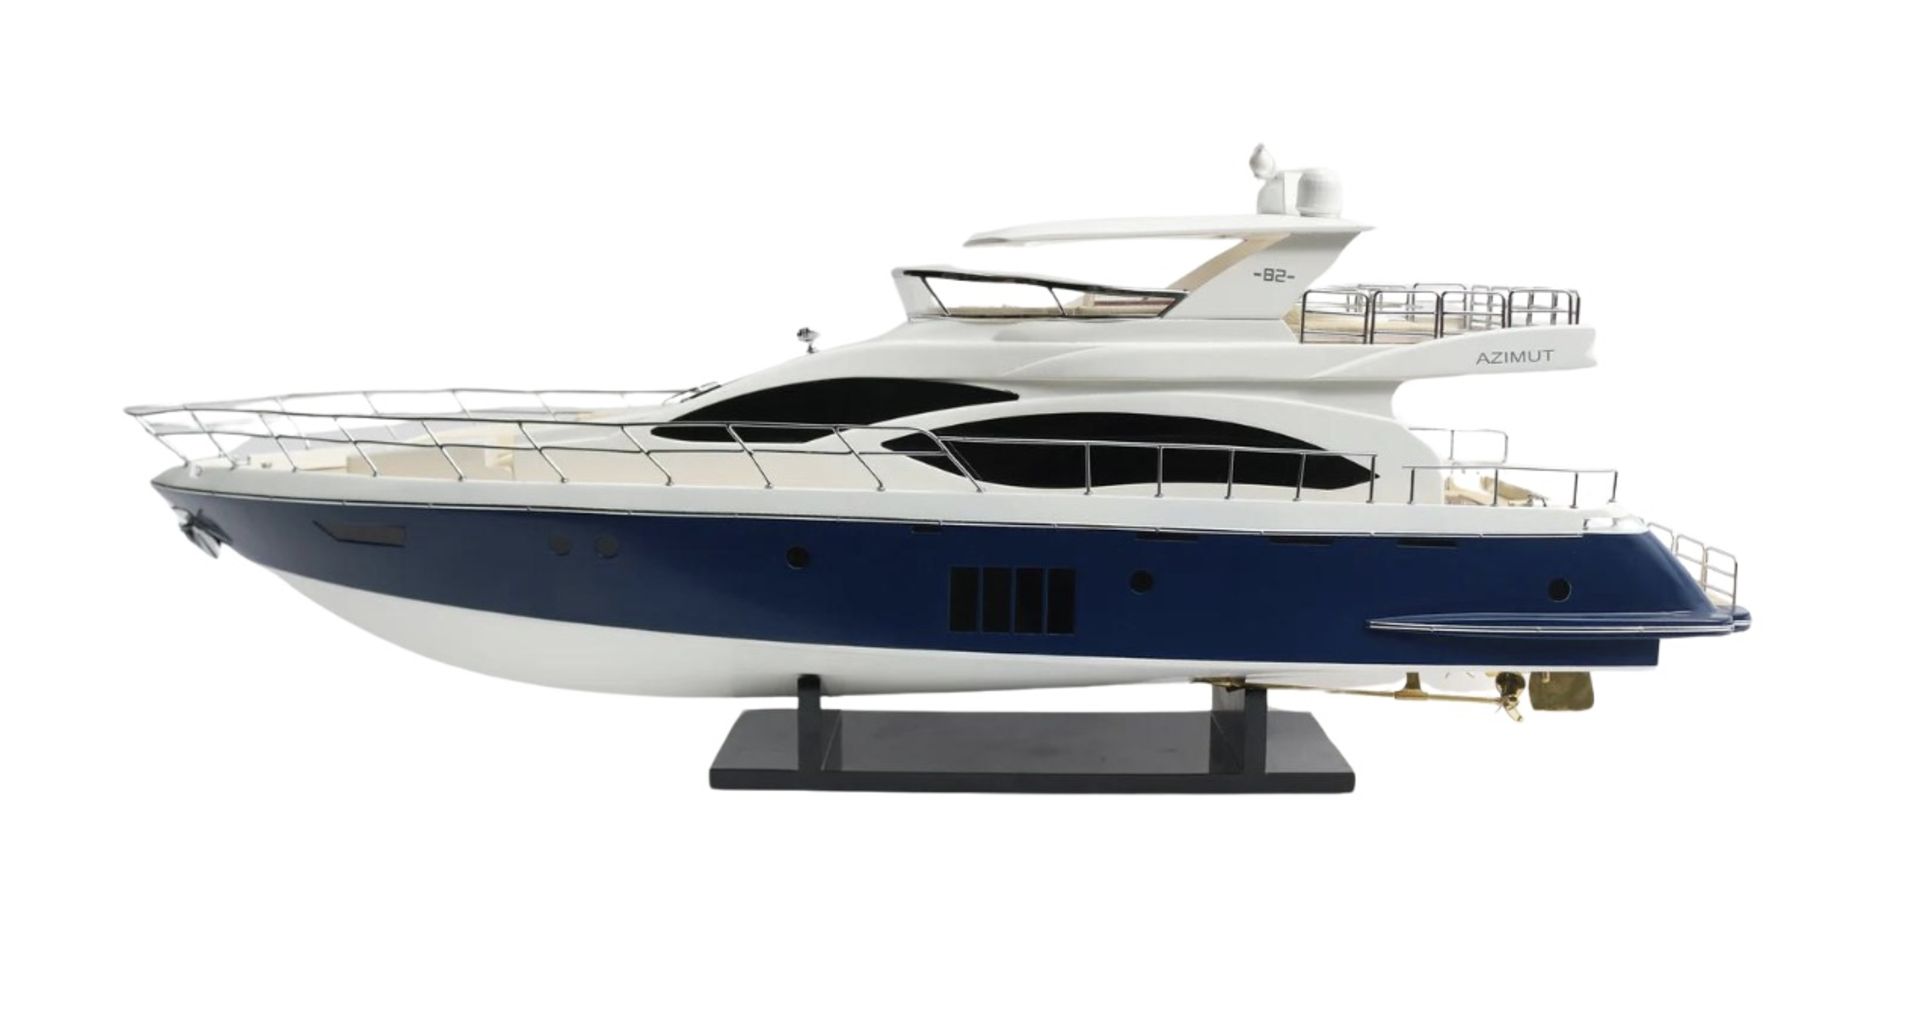 Azimut 82 Yacht Wooden Scale Desk Display Model - Image 4 of 10